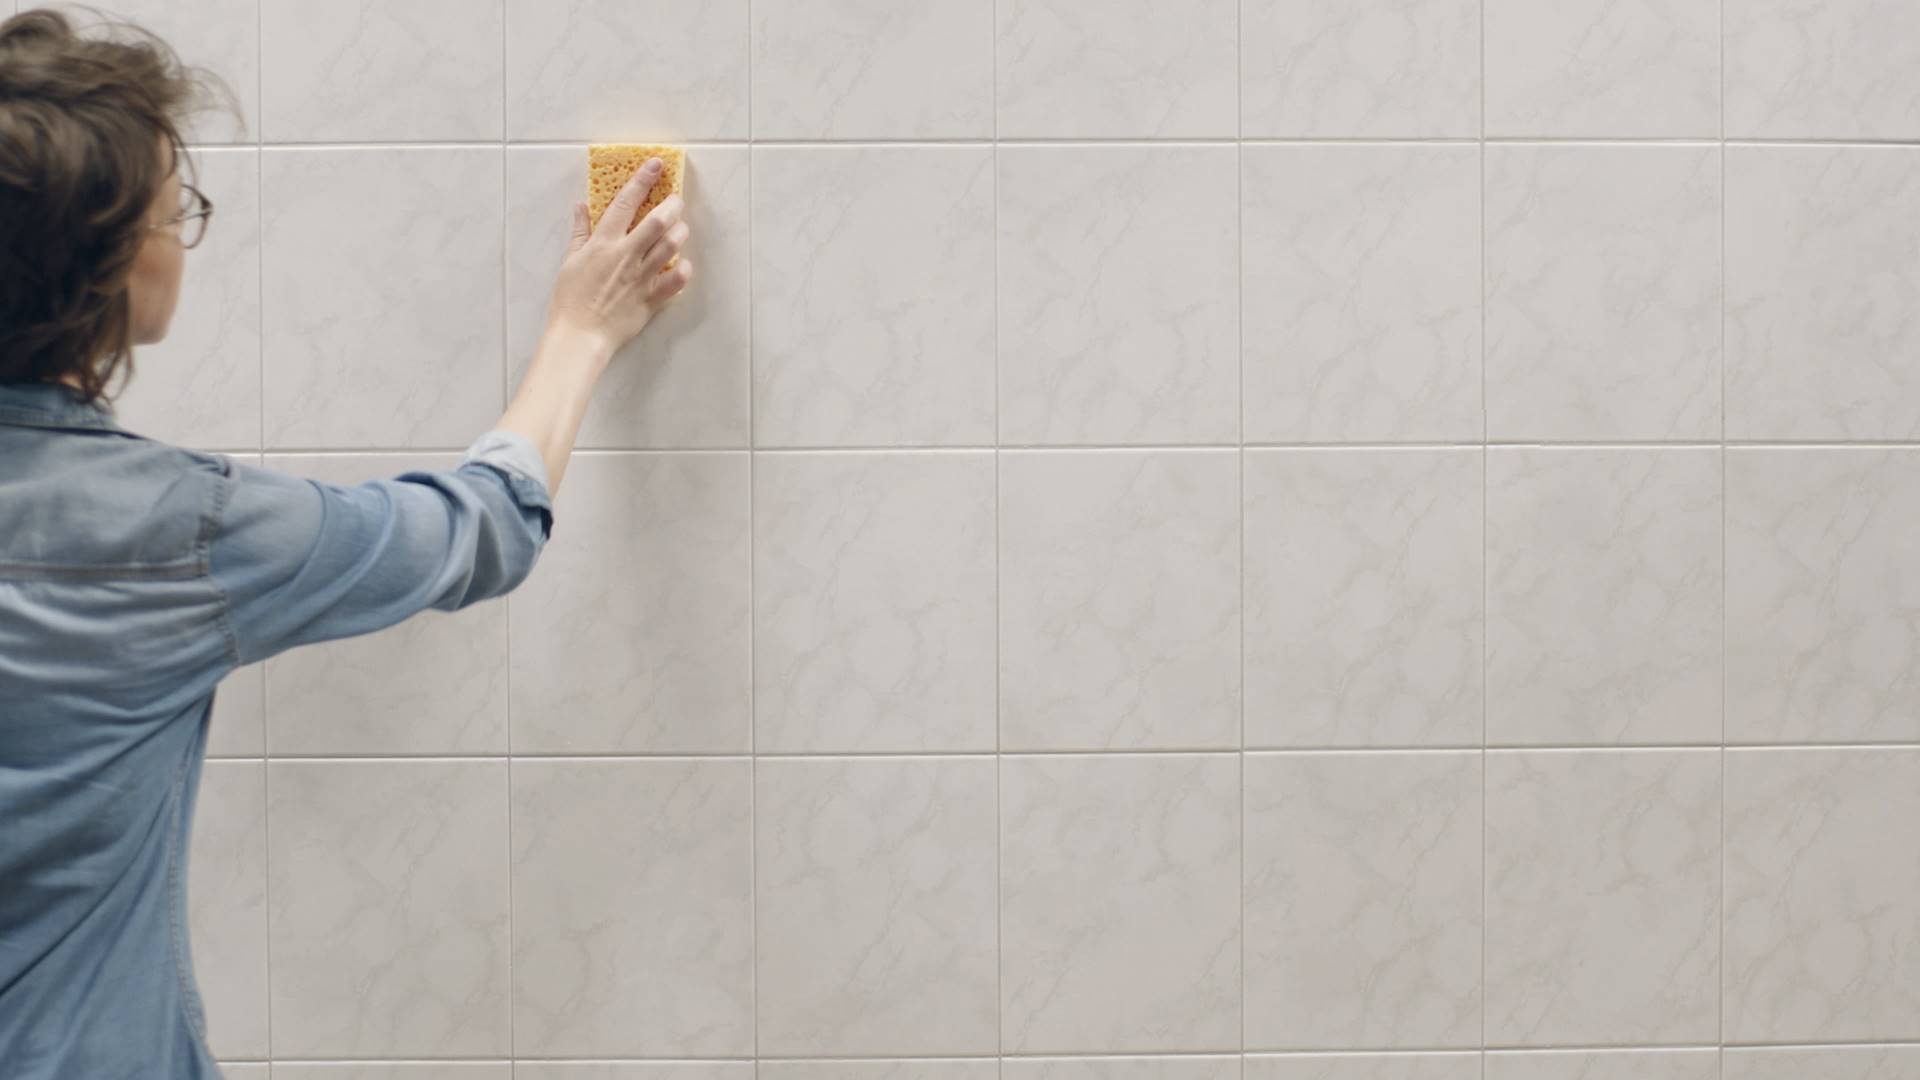 How to Dulux Simply Refresh wall tiles 0002 Capa 3